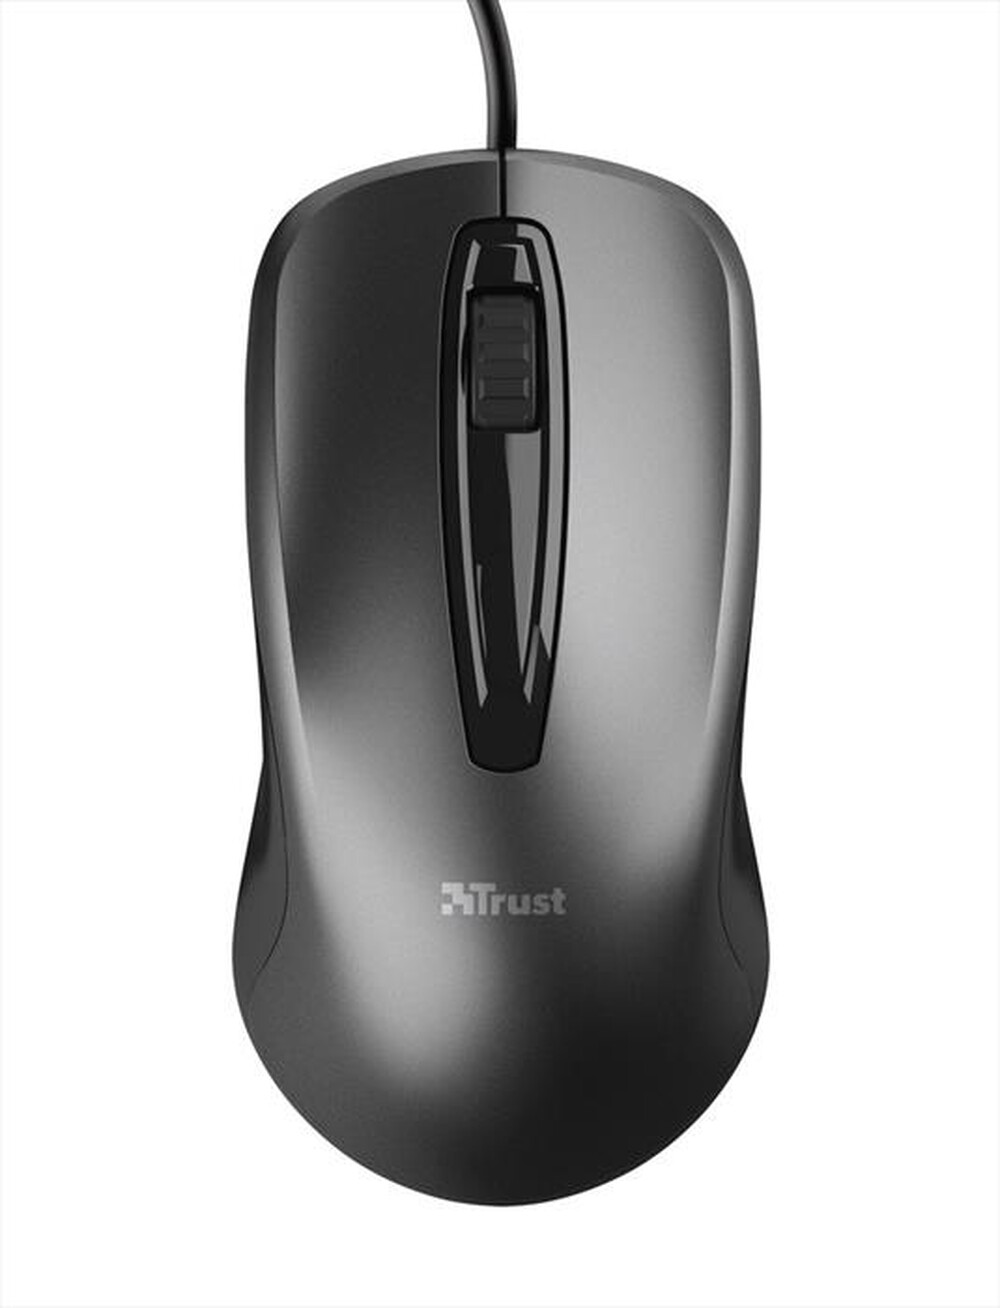 "TRUST - CARVE WIRED MOUSE - Black"